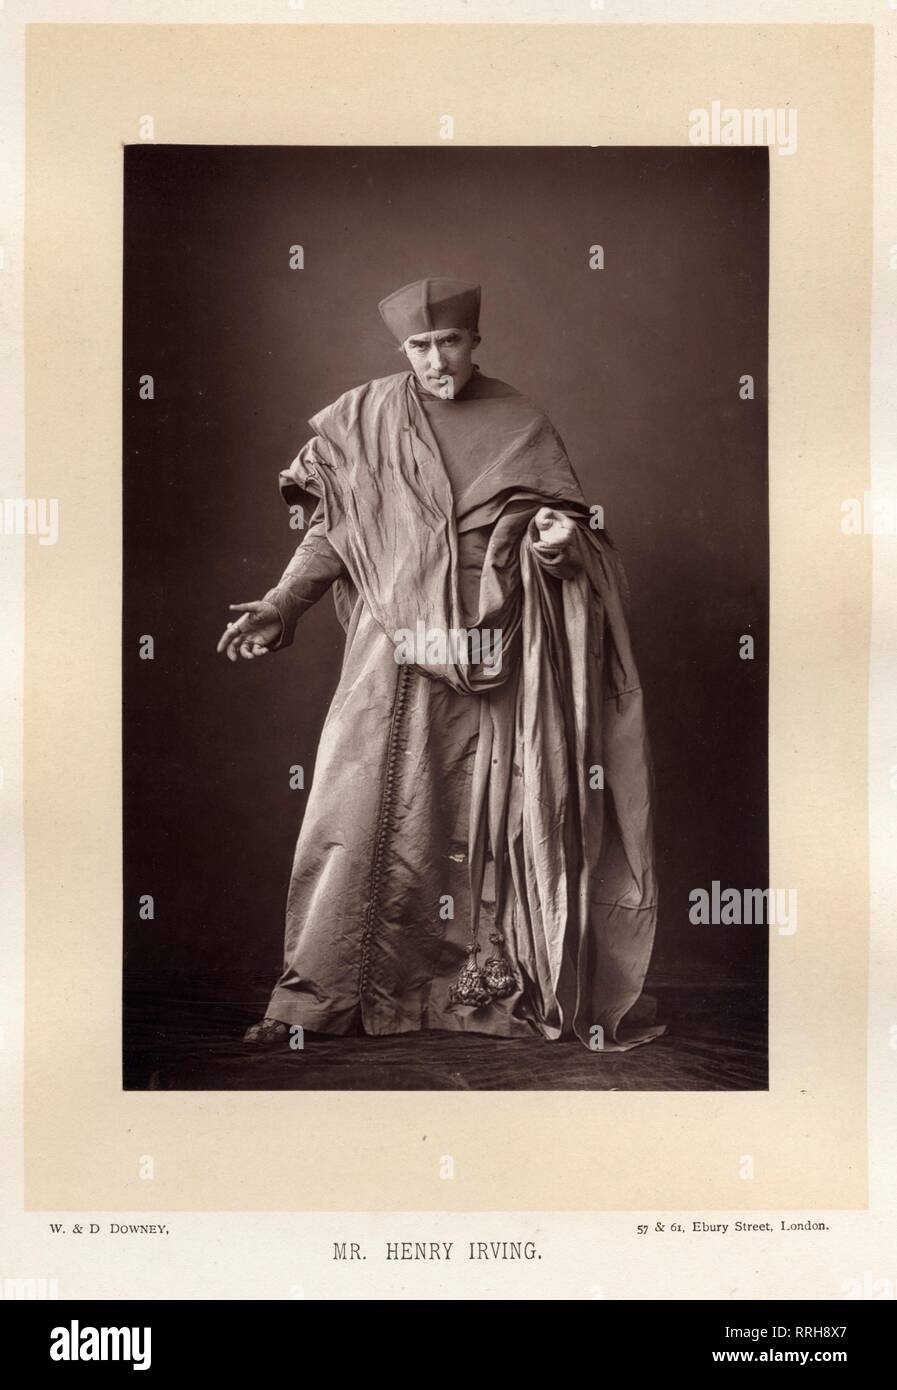 Mr Henry Irving as Cardinal Wolsey in 'Henry VIII', 1892, W & D Downey Stock Photo